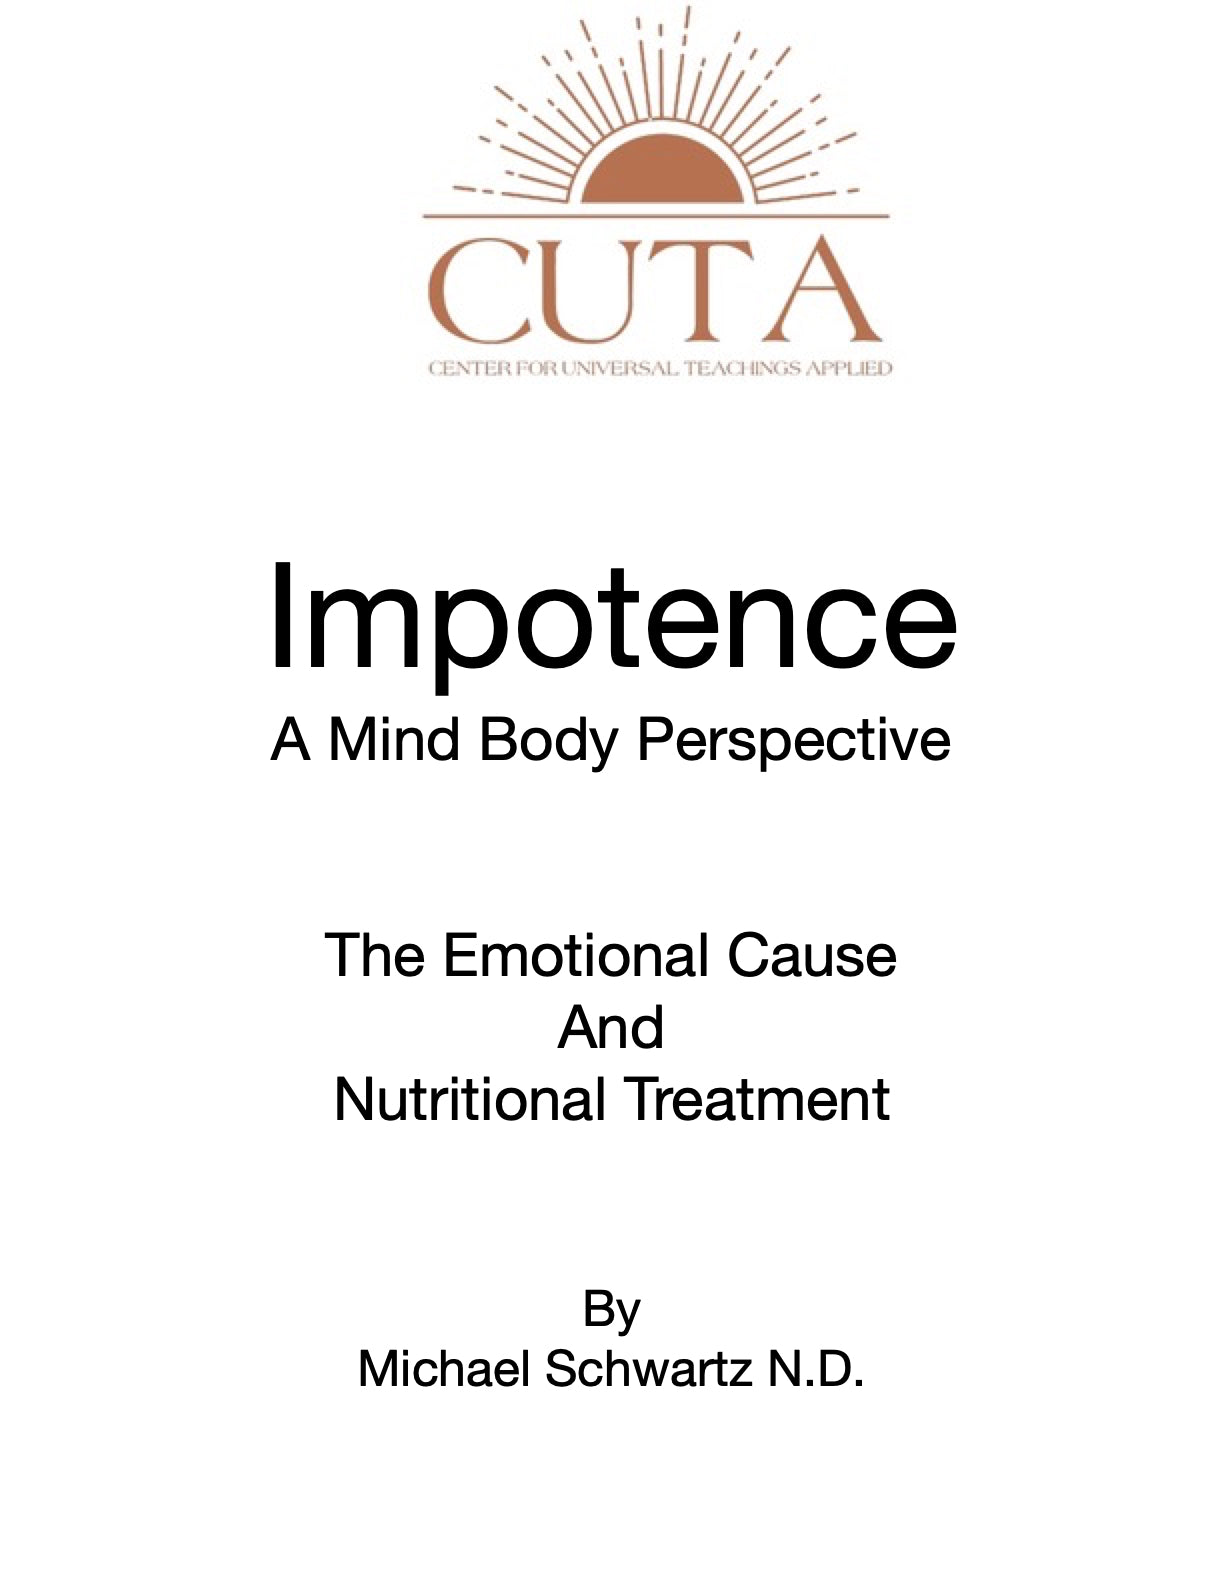 Impotence Booklet